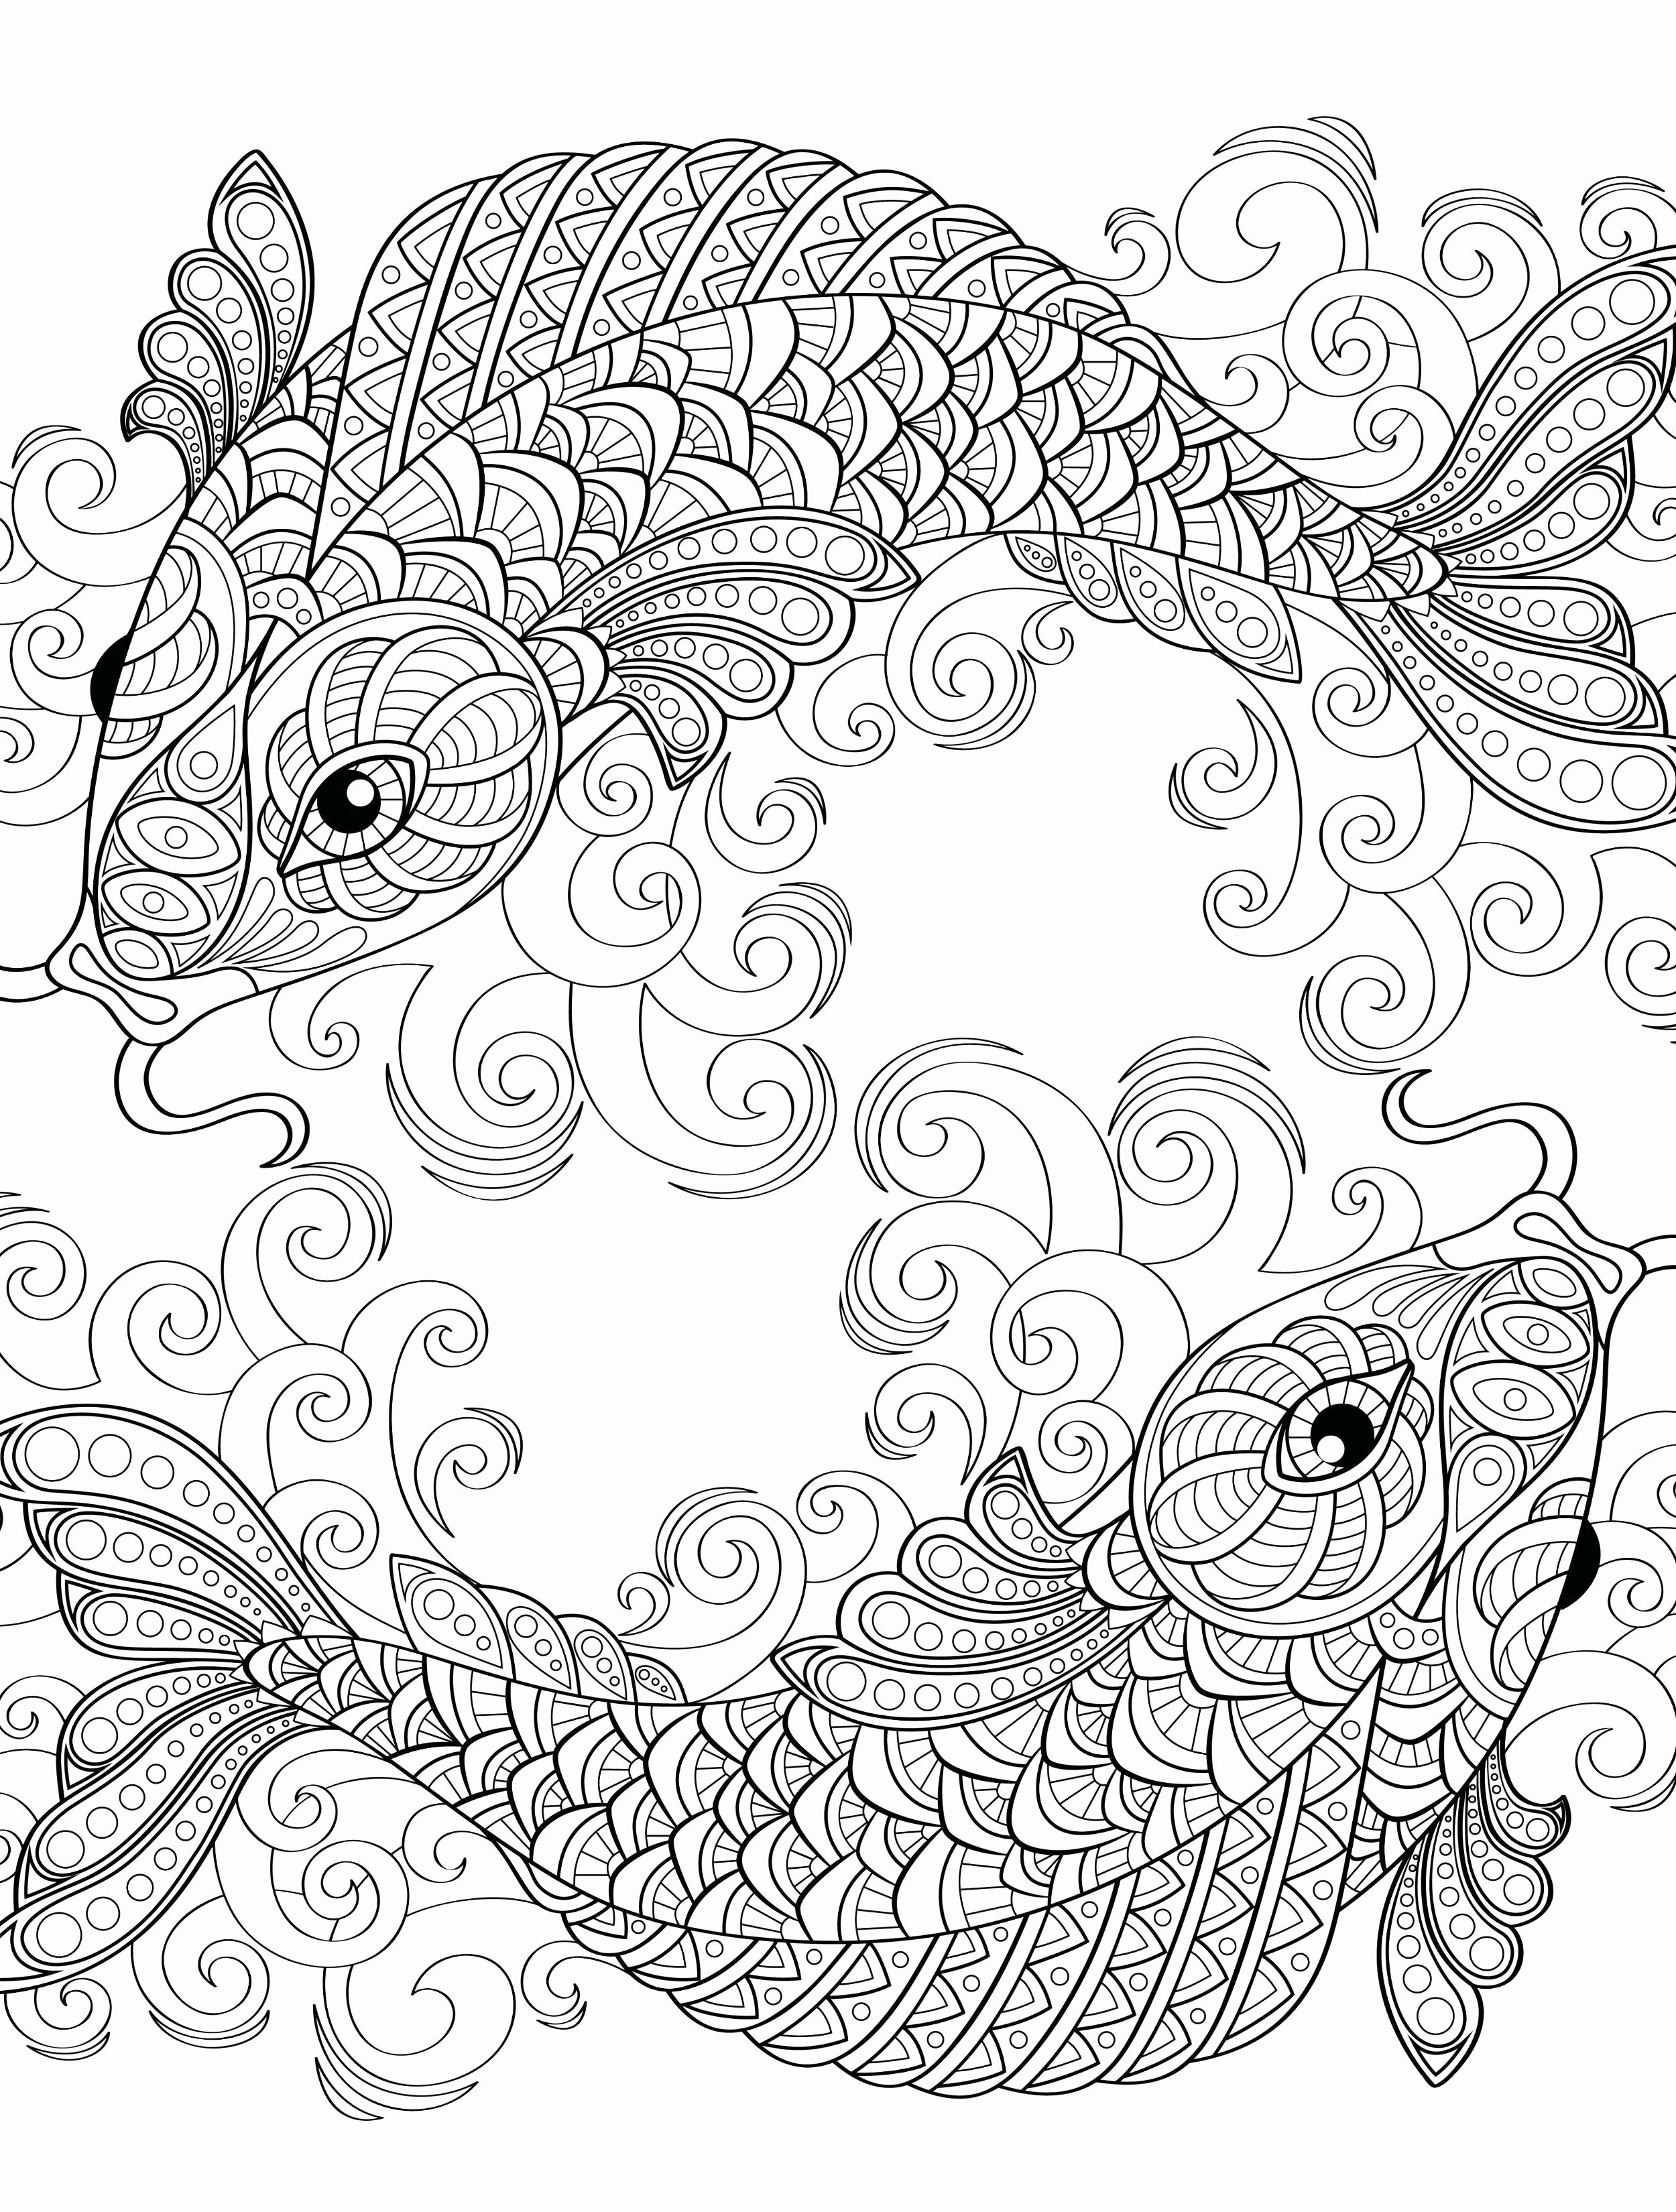 Free Jesus Coloring Pages Fresh Free Fish Coloring Pages New Disciples Od Jesus Christ Catching